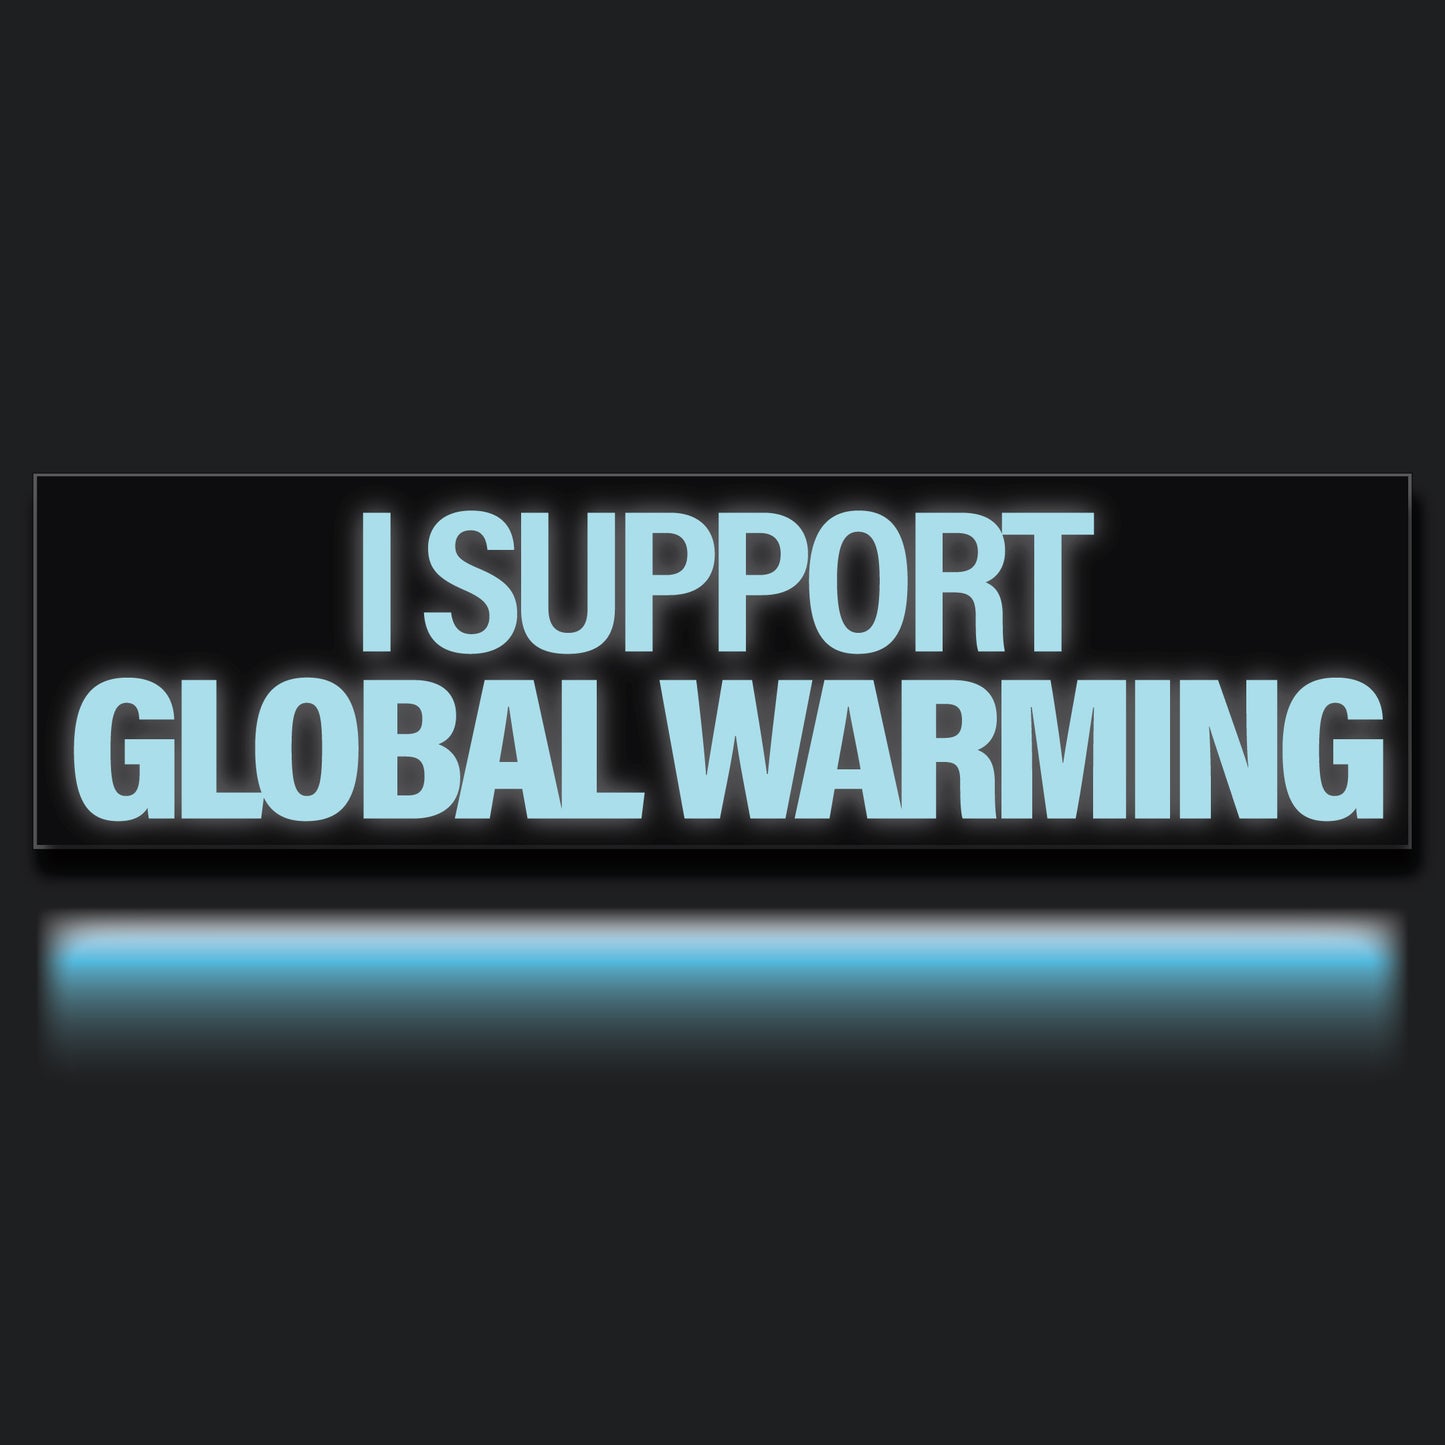 I Support Global Warming